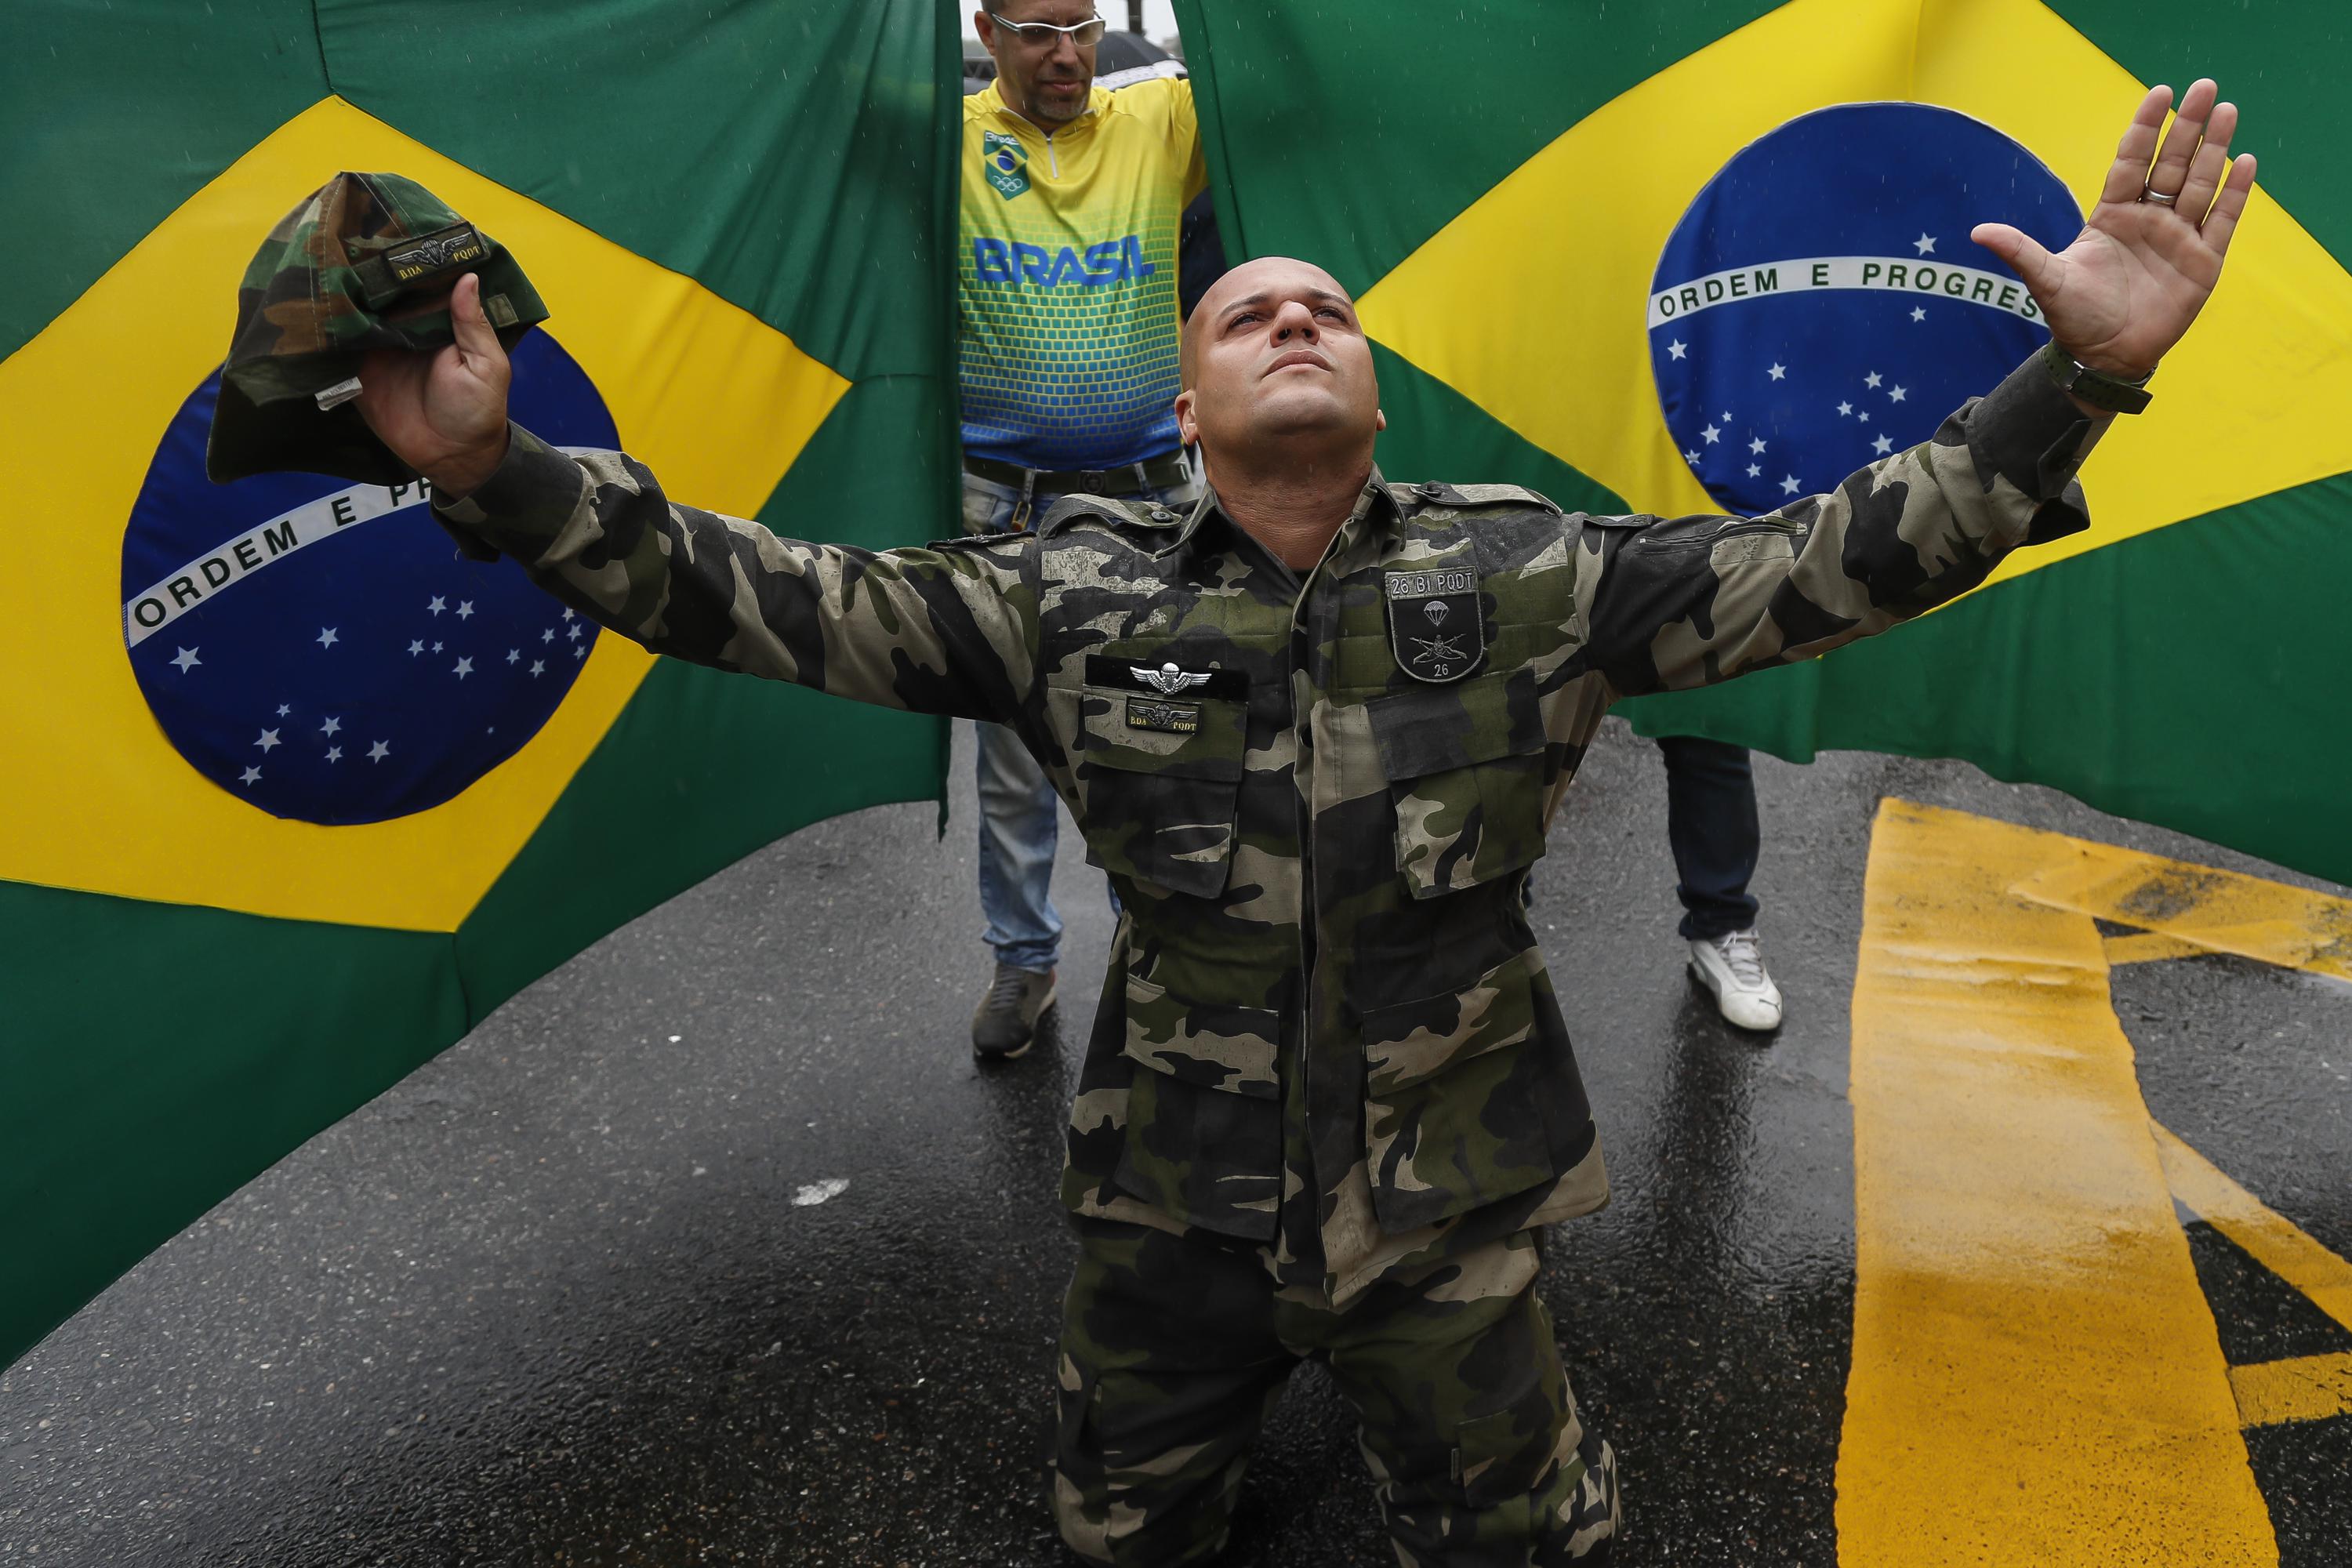 Report by Brazil's military on election count cites no fraud